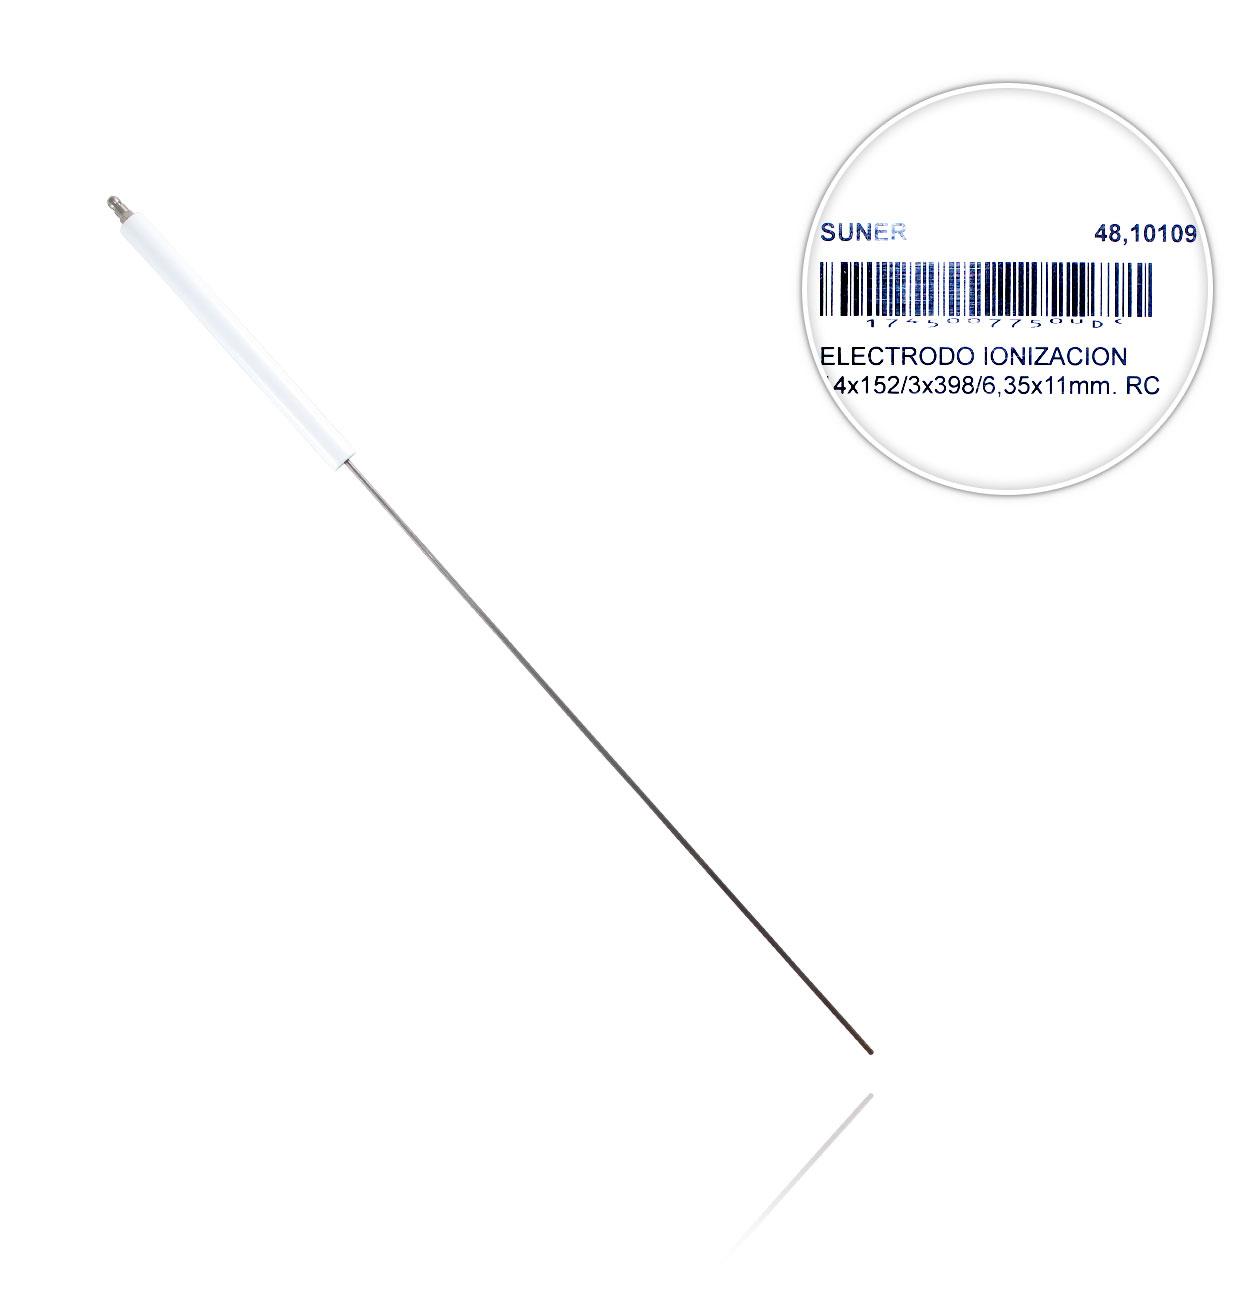 14x152/3x398/6.35x11mm RC IONISATION ELECTRODE